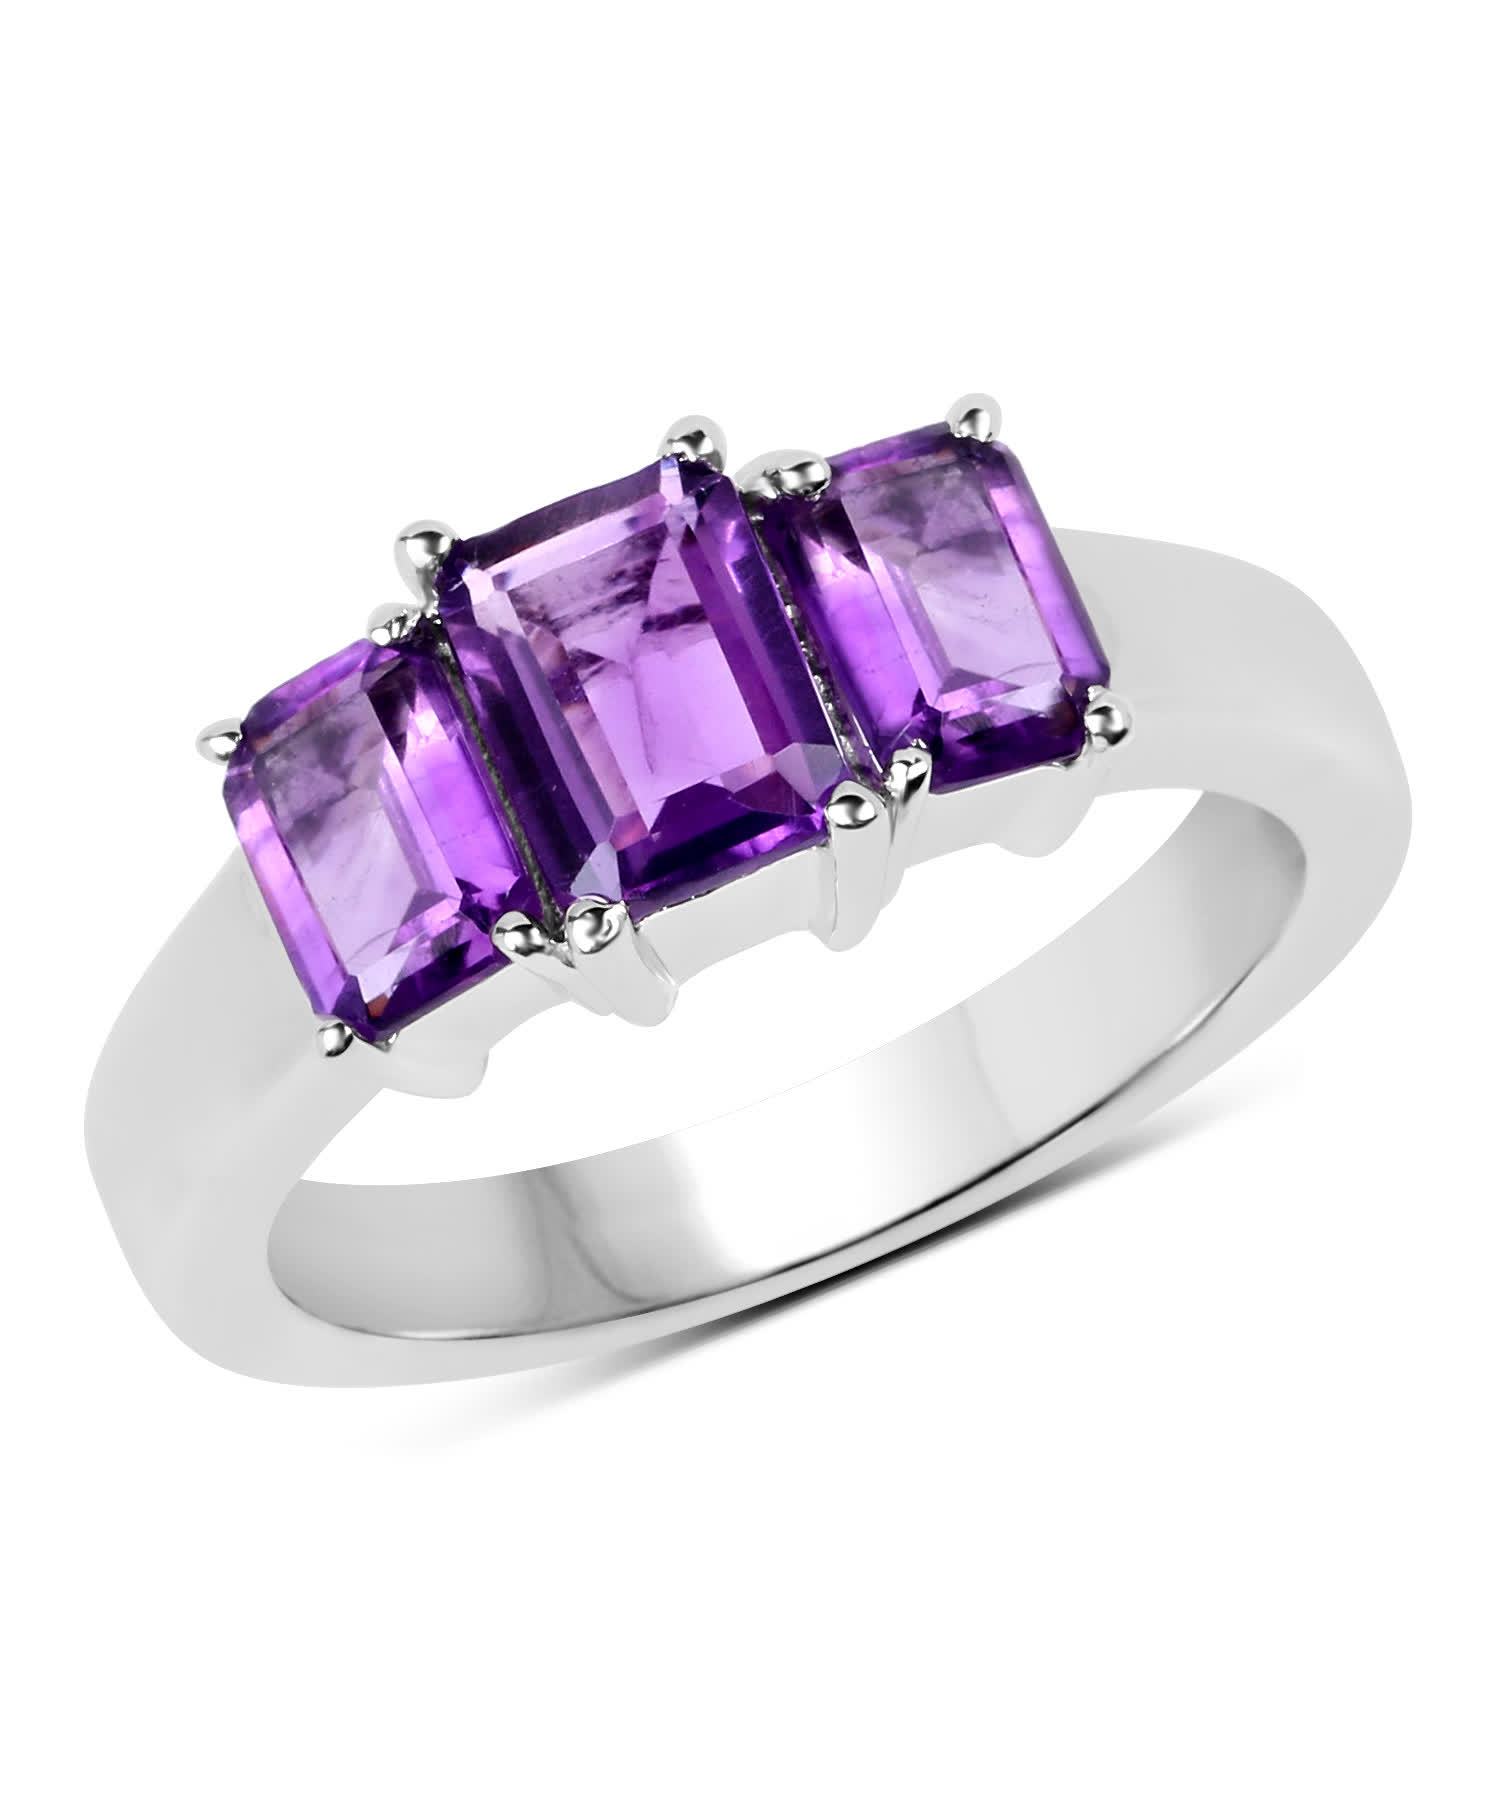 2.10ctw Natural Amethyst Rhodium Plated 925 Sterling Silver Three-Stone Ring View 1